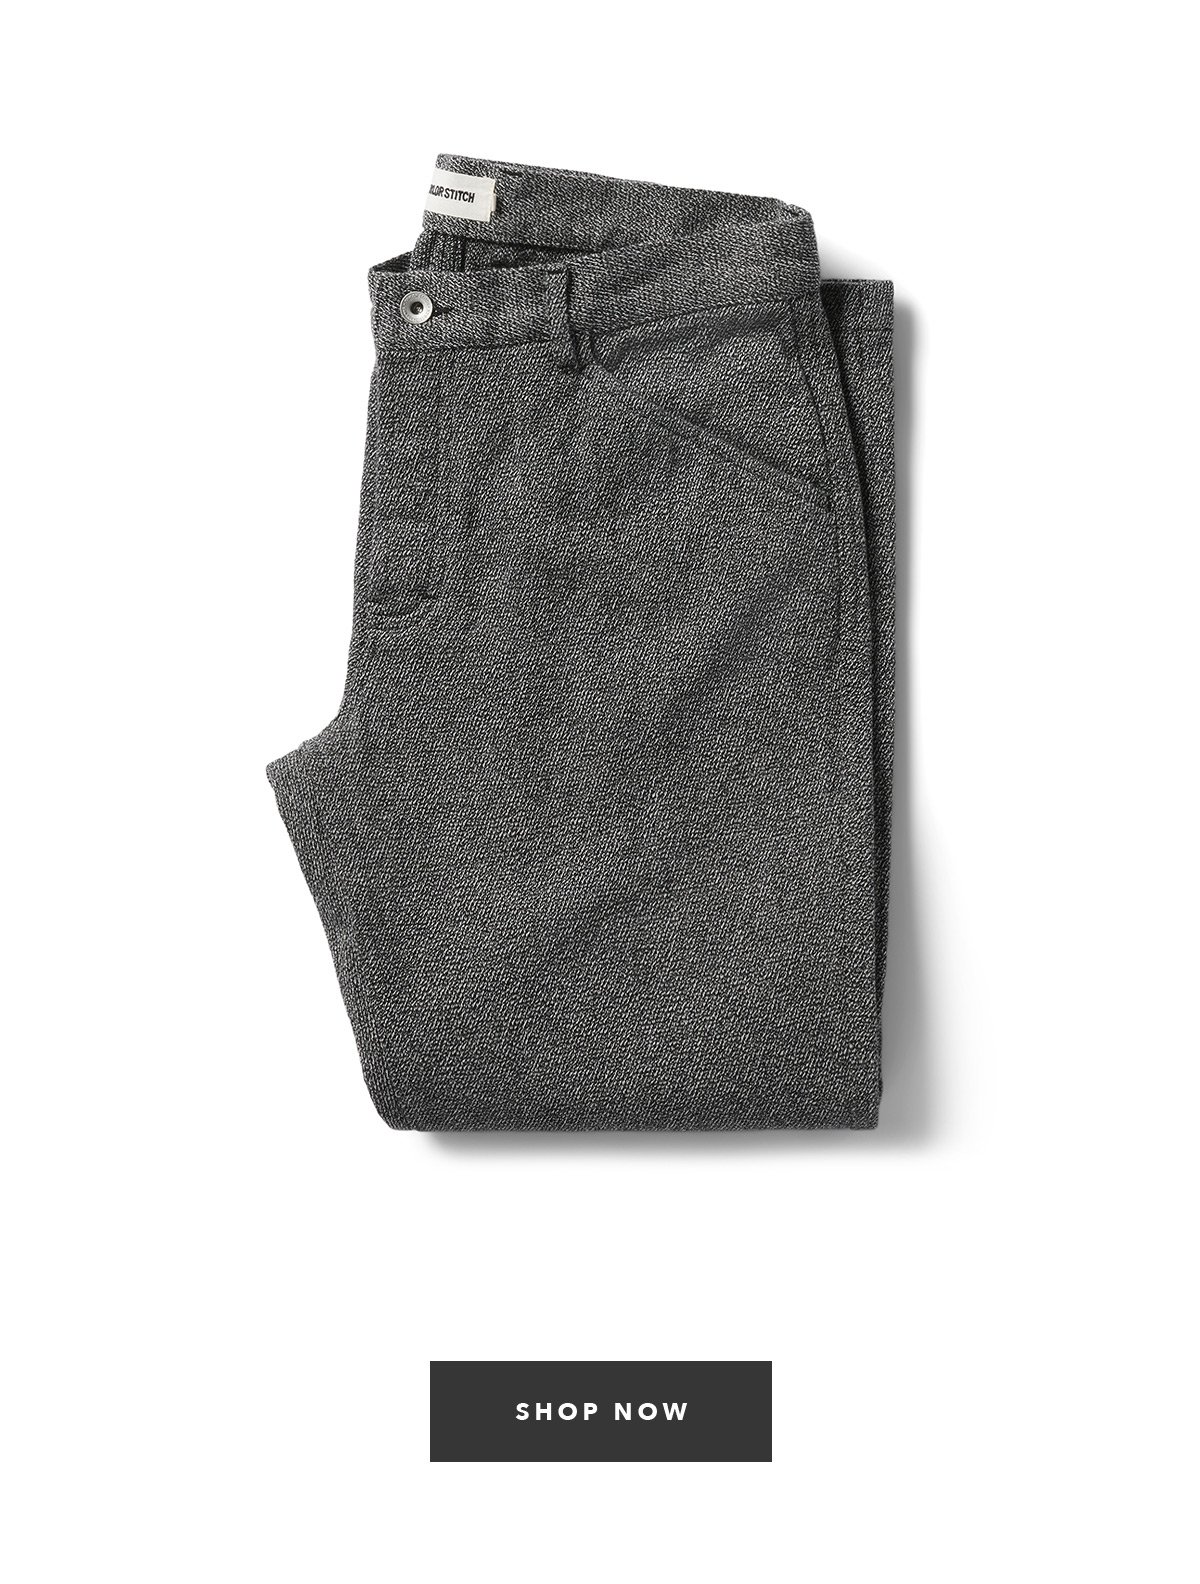 The Camp Pant in Indigo Salt and Pepper